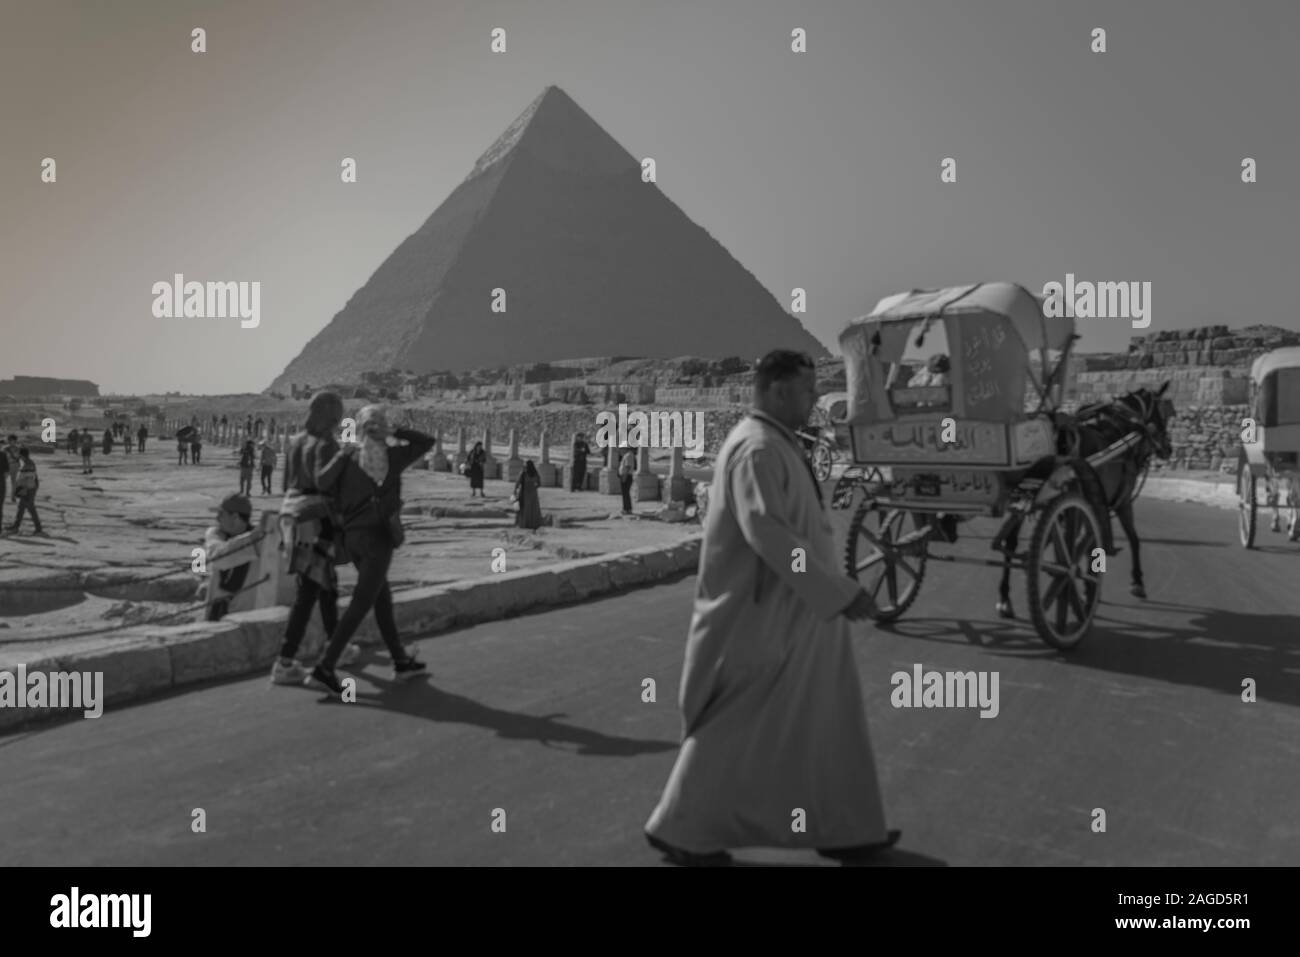 NOVEMBER 2019, CAIRO EGYPT, View of the Great Pyramids of Giza, Cairo with Egyptian male walking in front of carts Stock Photo